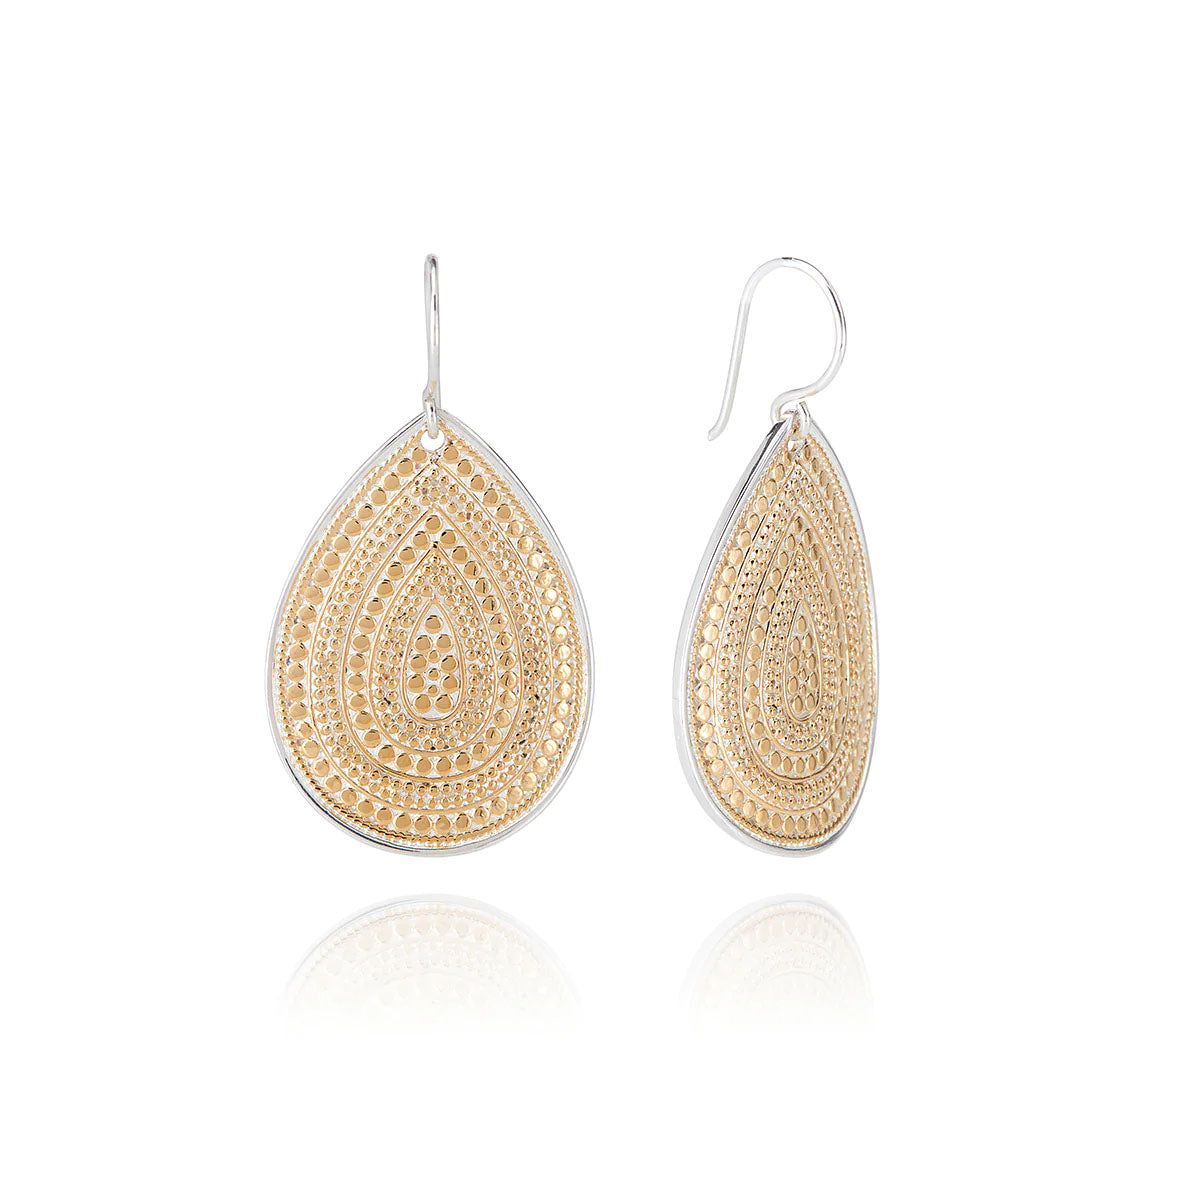 Anna Beck Classic Large Teardrop Earrings - Gold